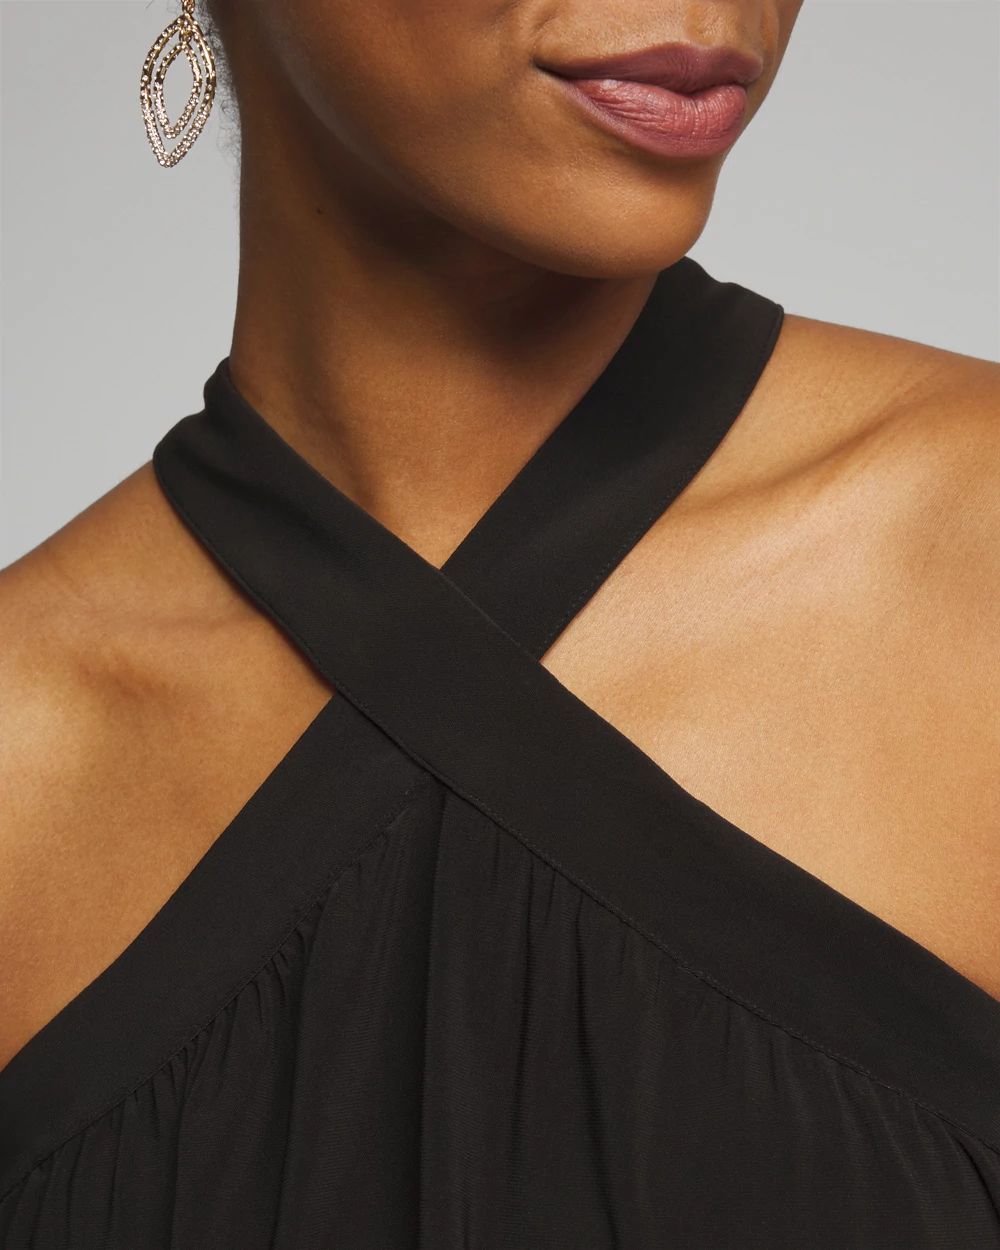 Outlet WHBM Cross Front Halter Top click to view larger image.